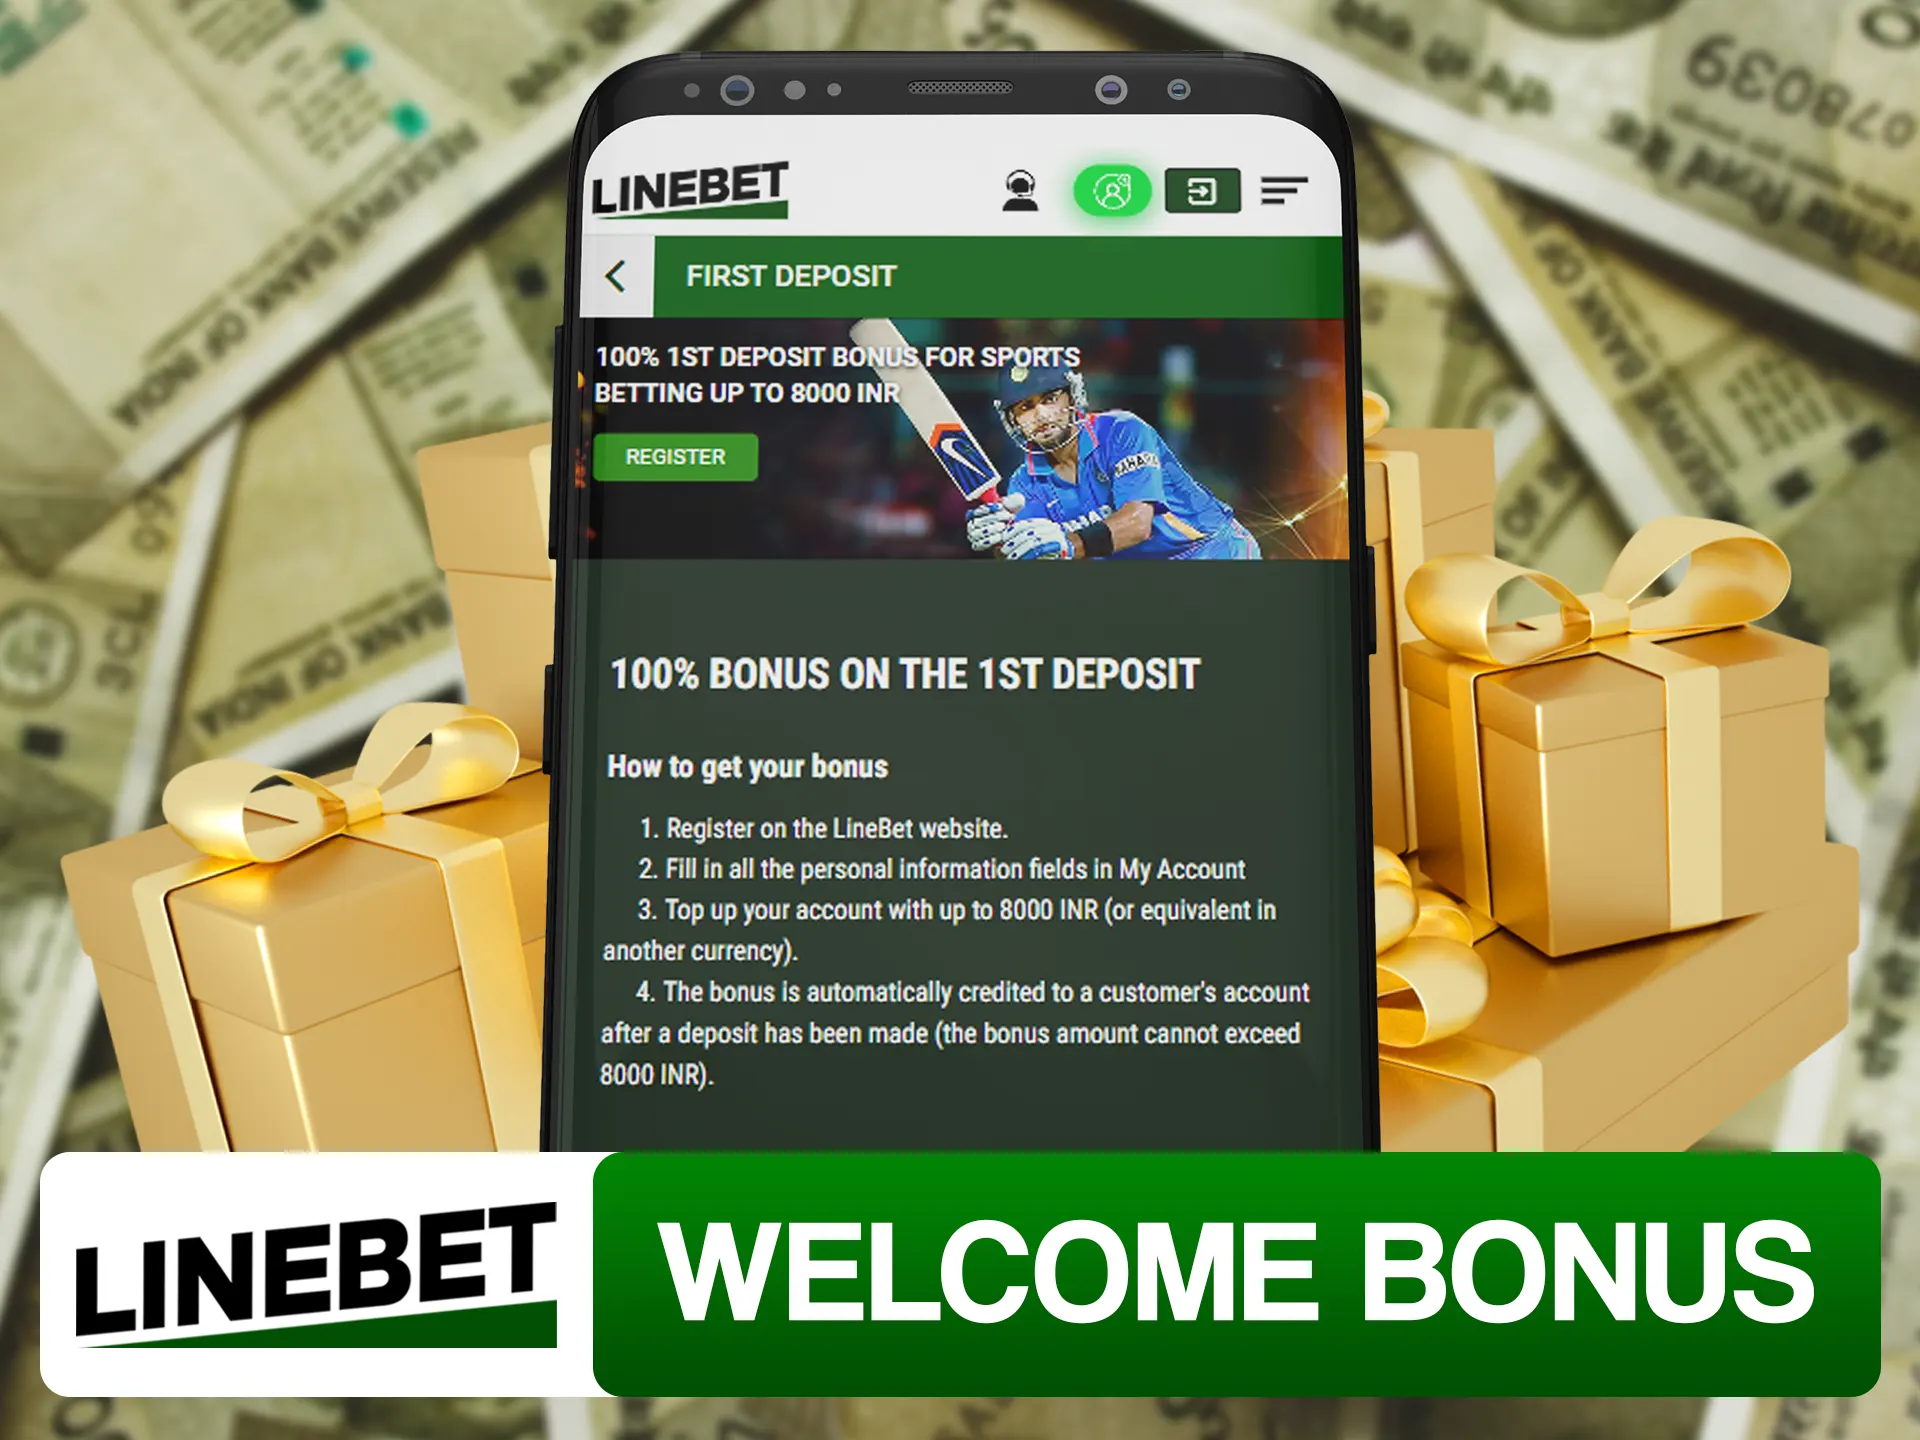 Get your Linebet welcome bonus in app after making first deposit.